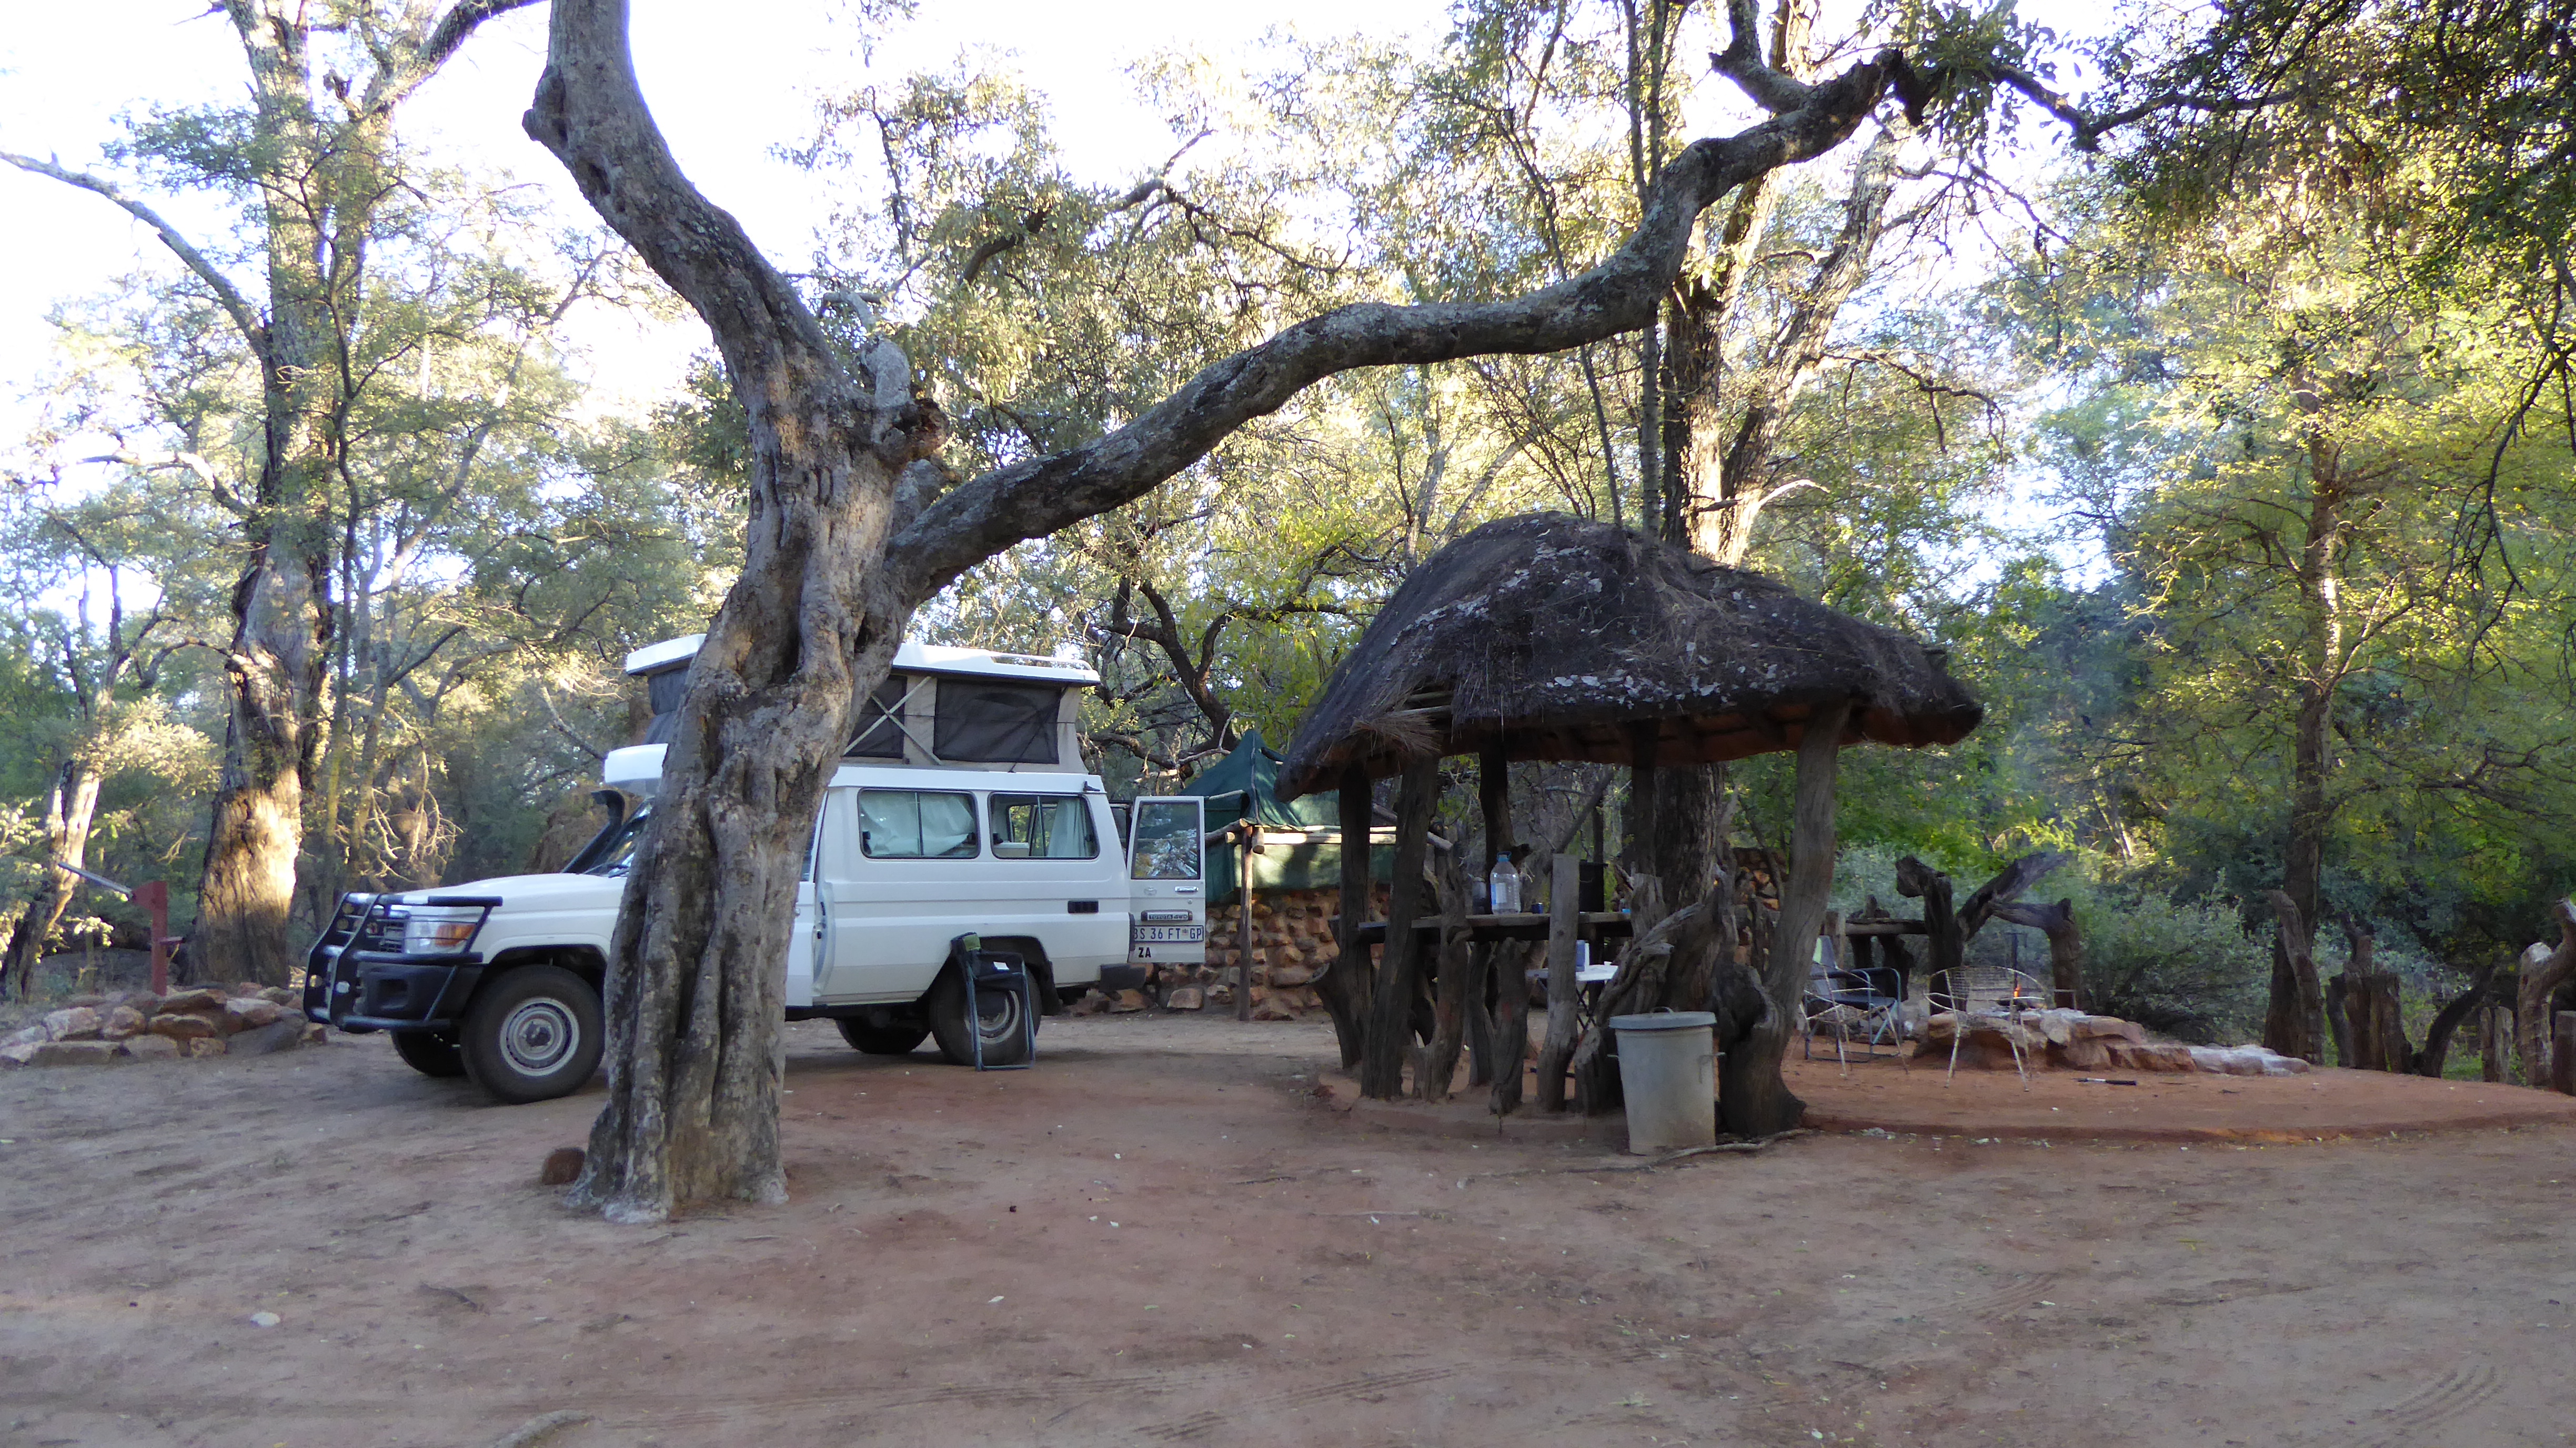 Private bush camp in South Africa. With an emphasis on the word private.